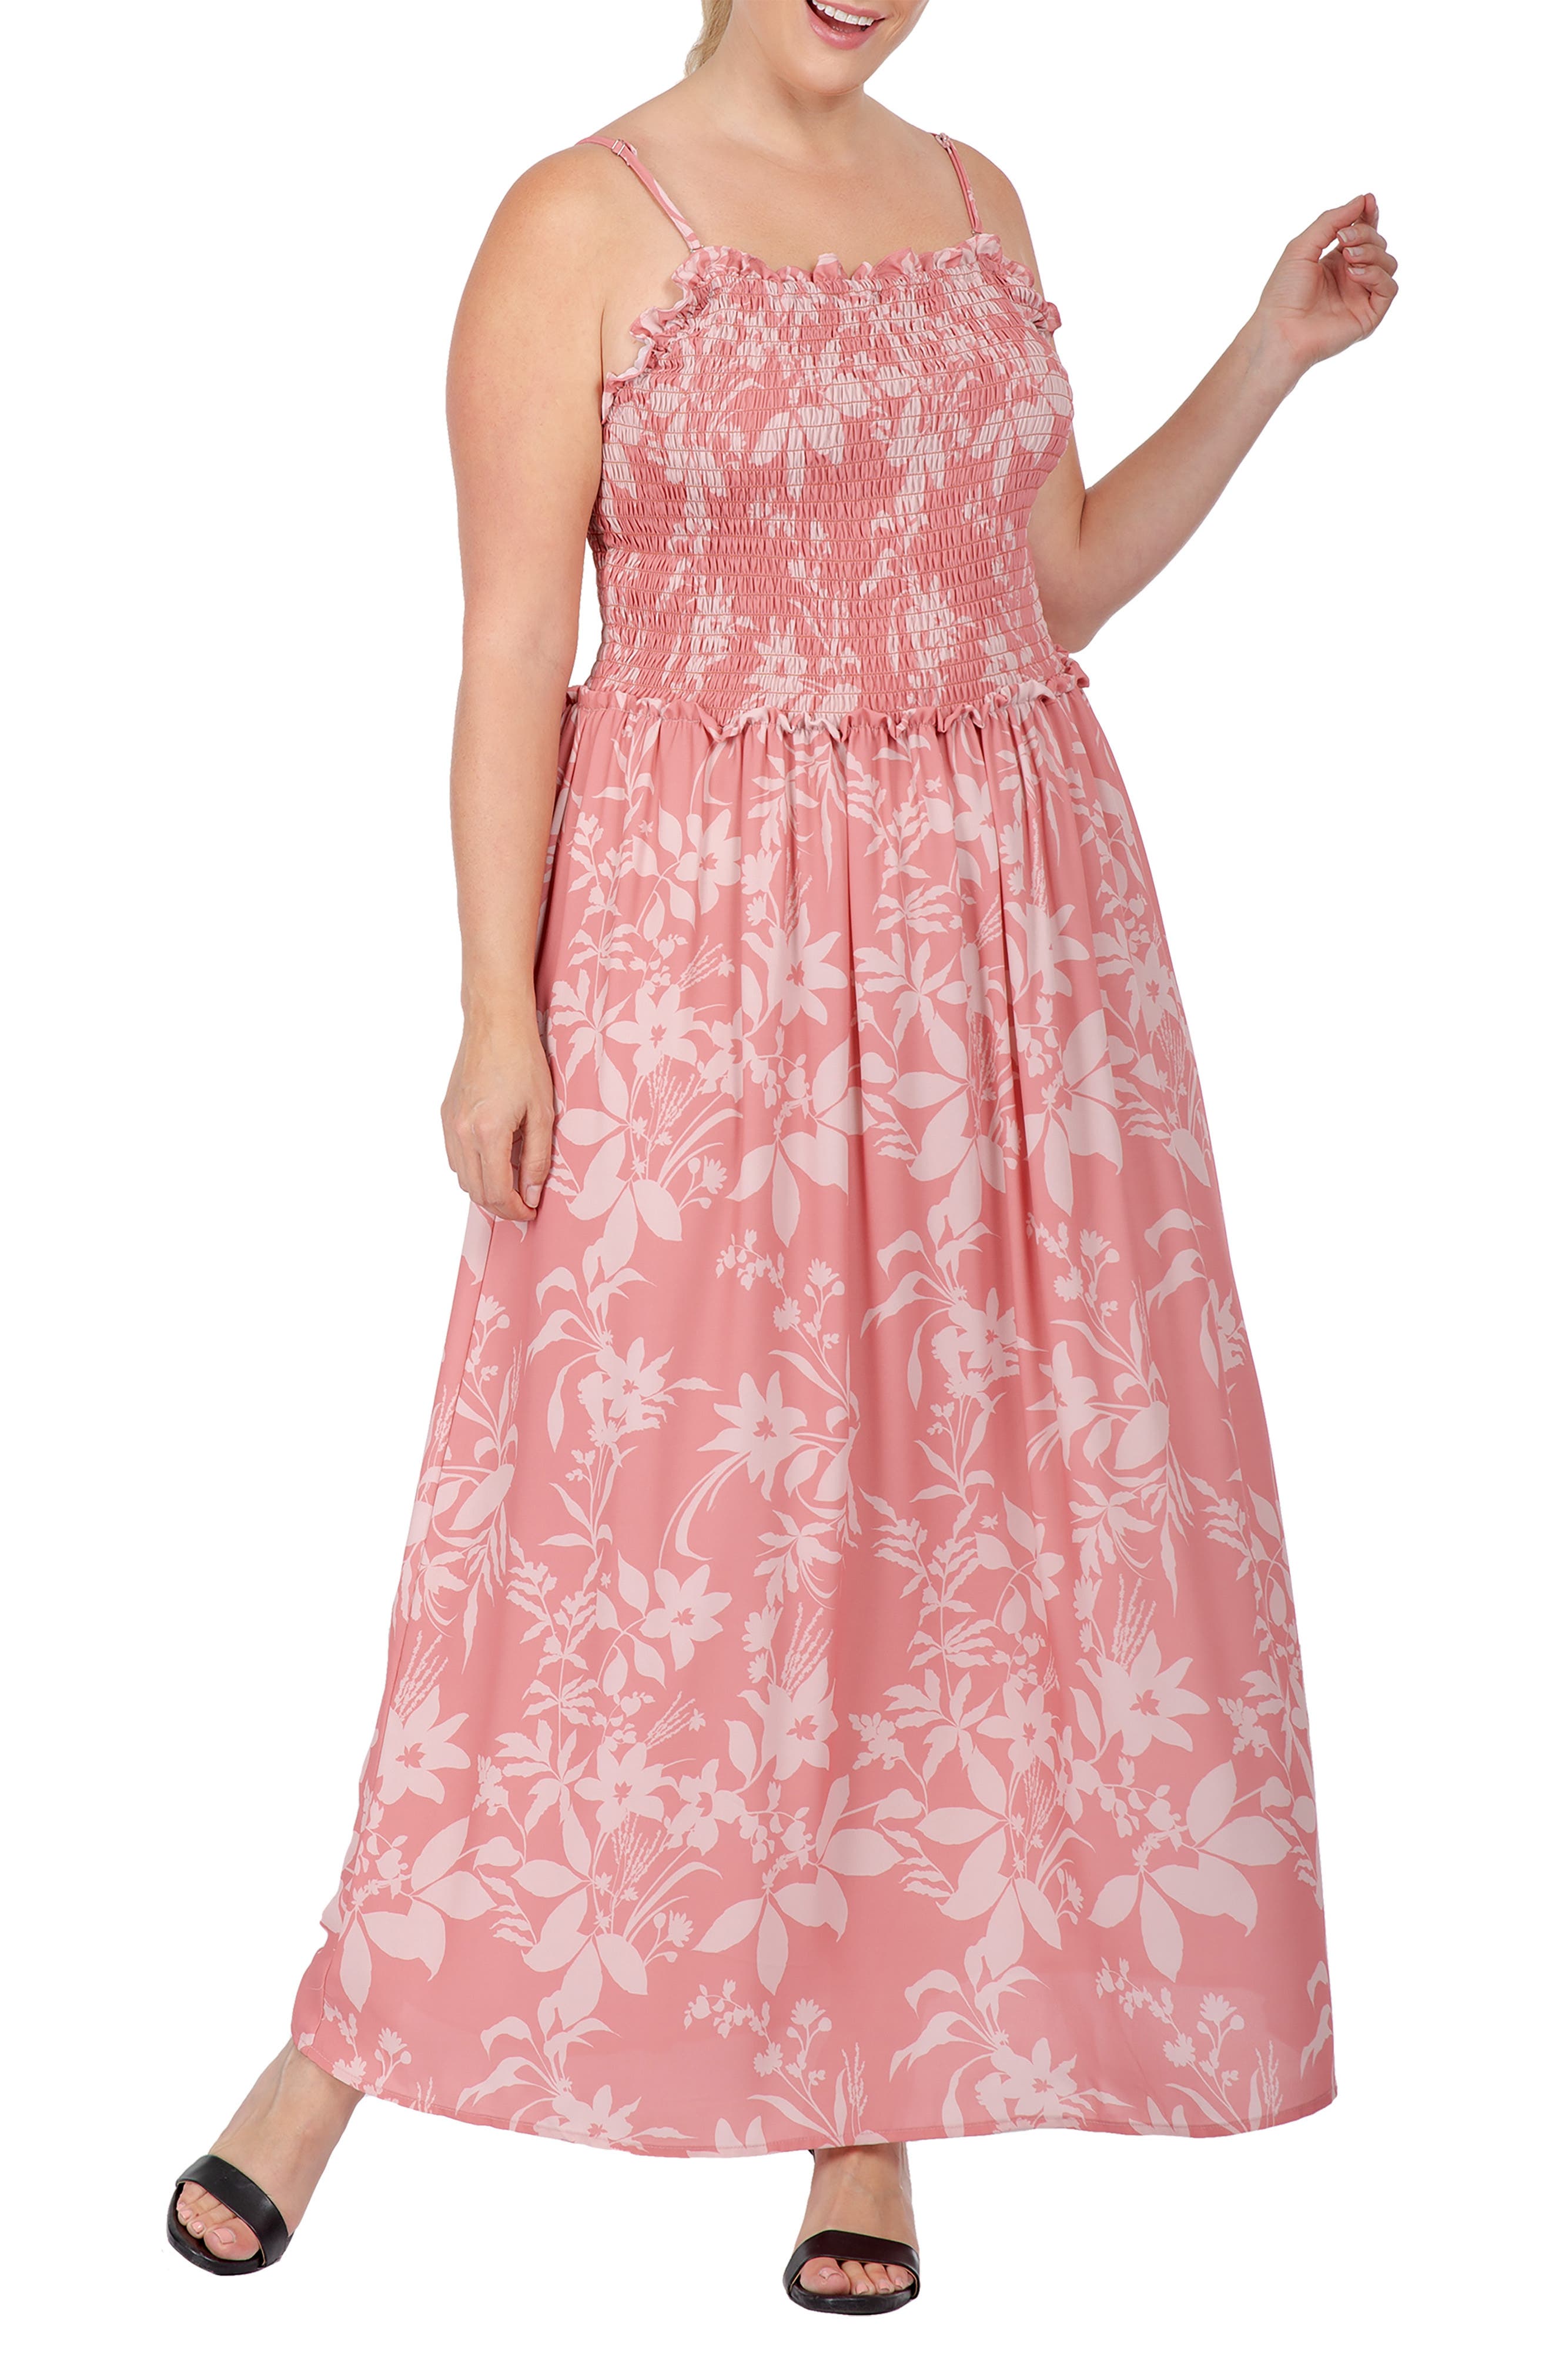 Nordstrom Women Clothing Dresses Summer Dresses Get to You Floral Maxi Sundress in Hydrangea Combo at Nordstrom 